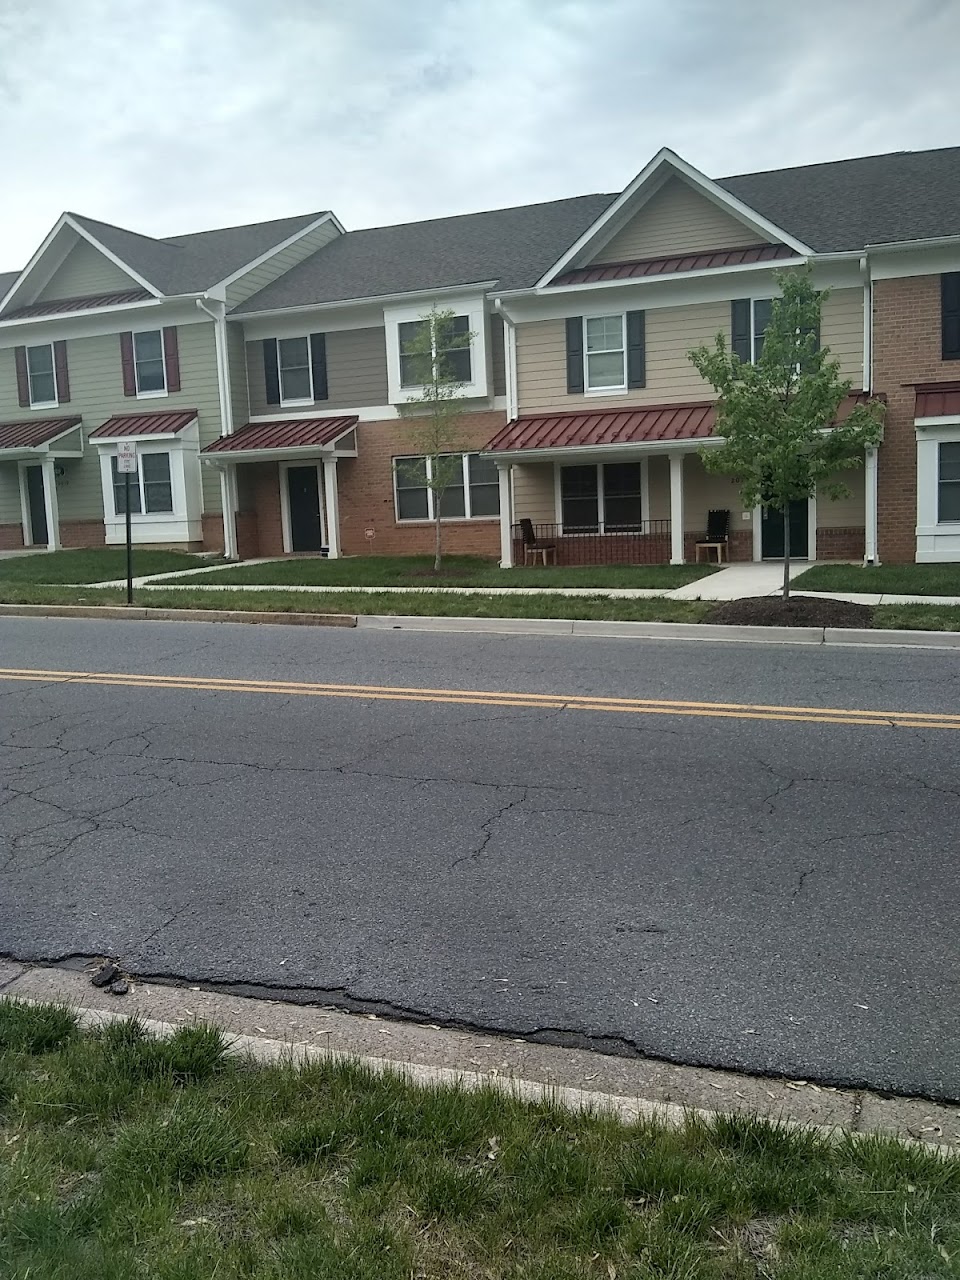 Photo of WOODLAND SPRINGS. Affordable housing located at 6617 ATWOOD STREET DISTRICT HEIGHTS, MD 20747